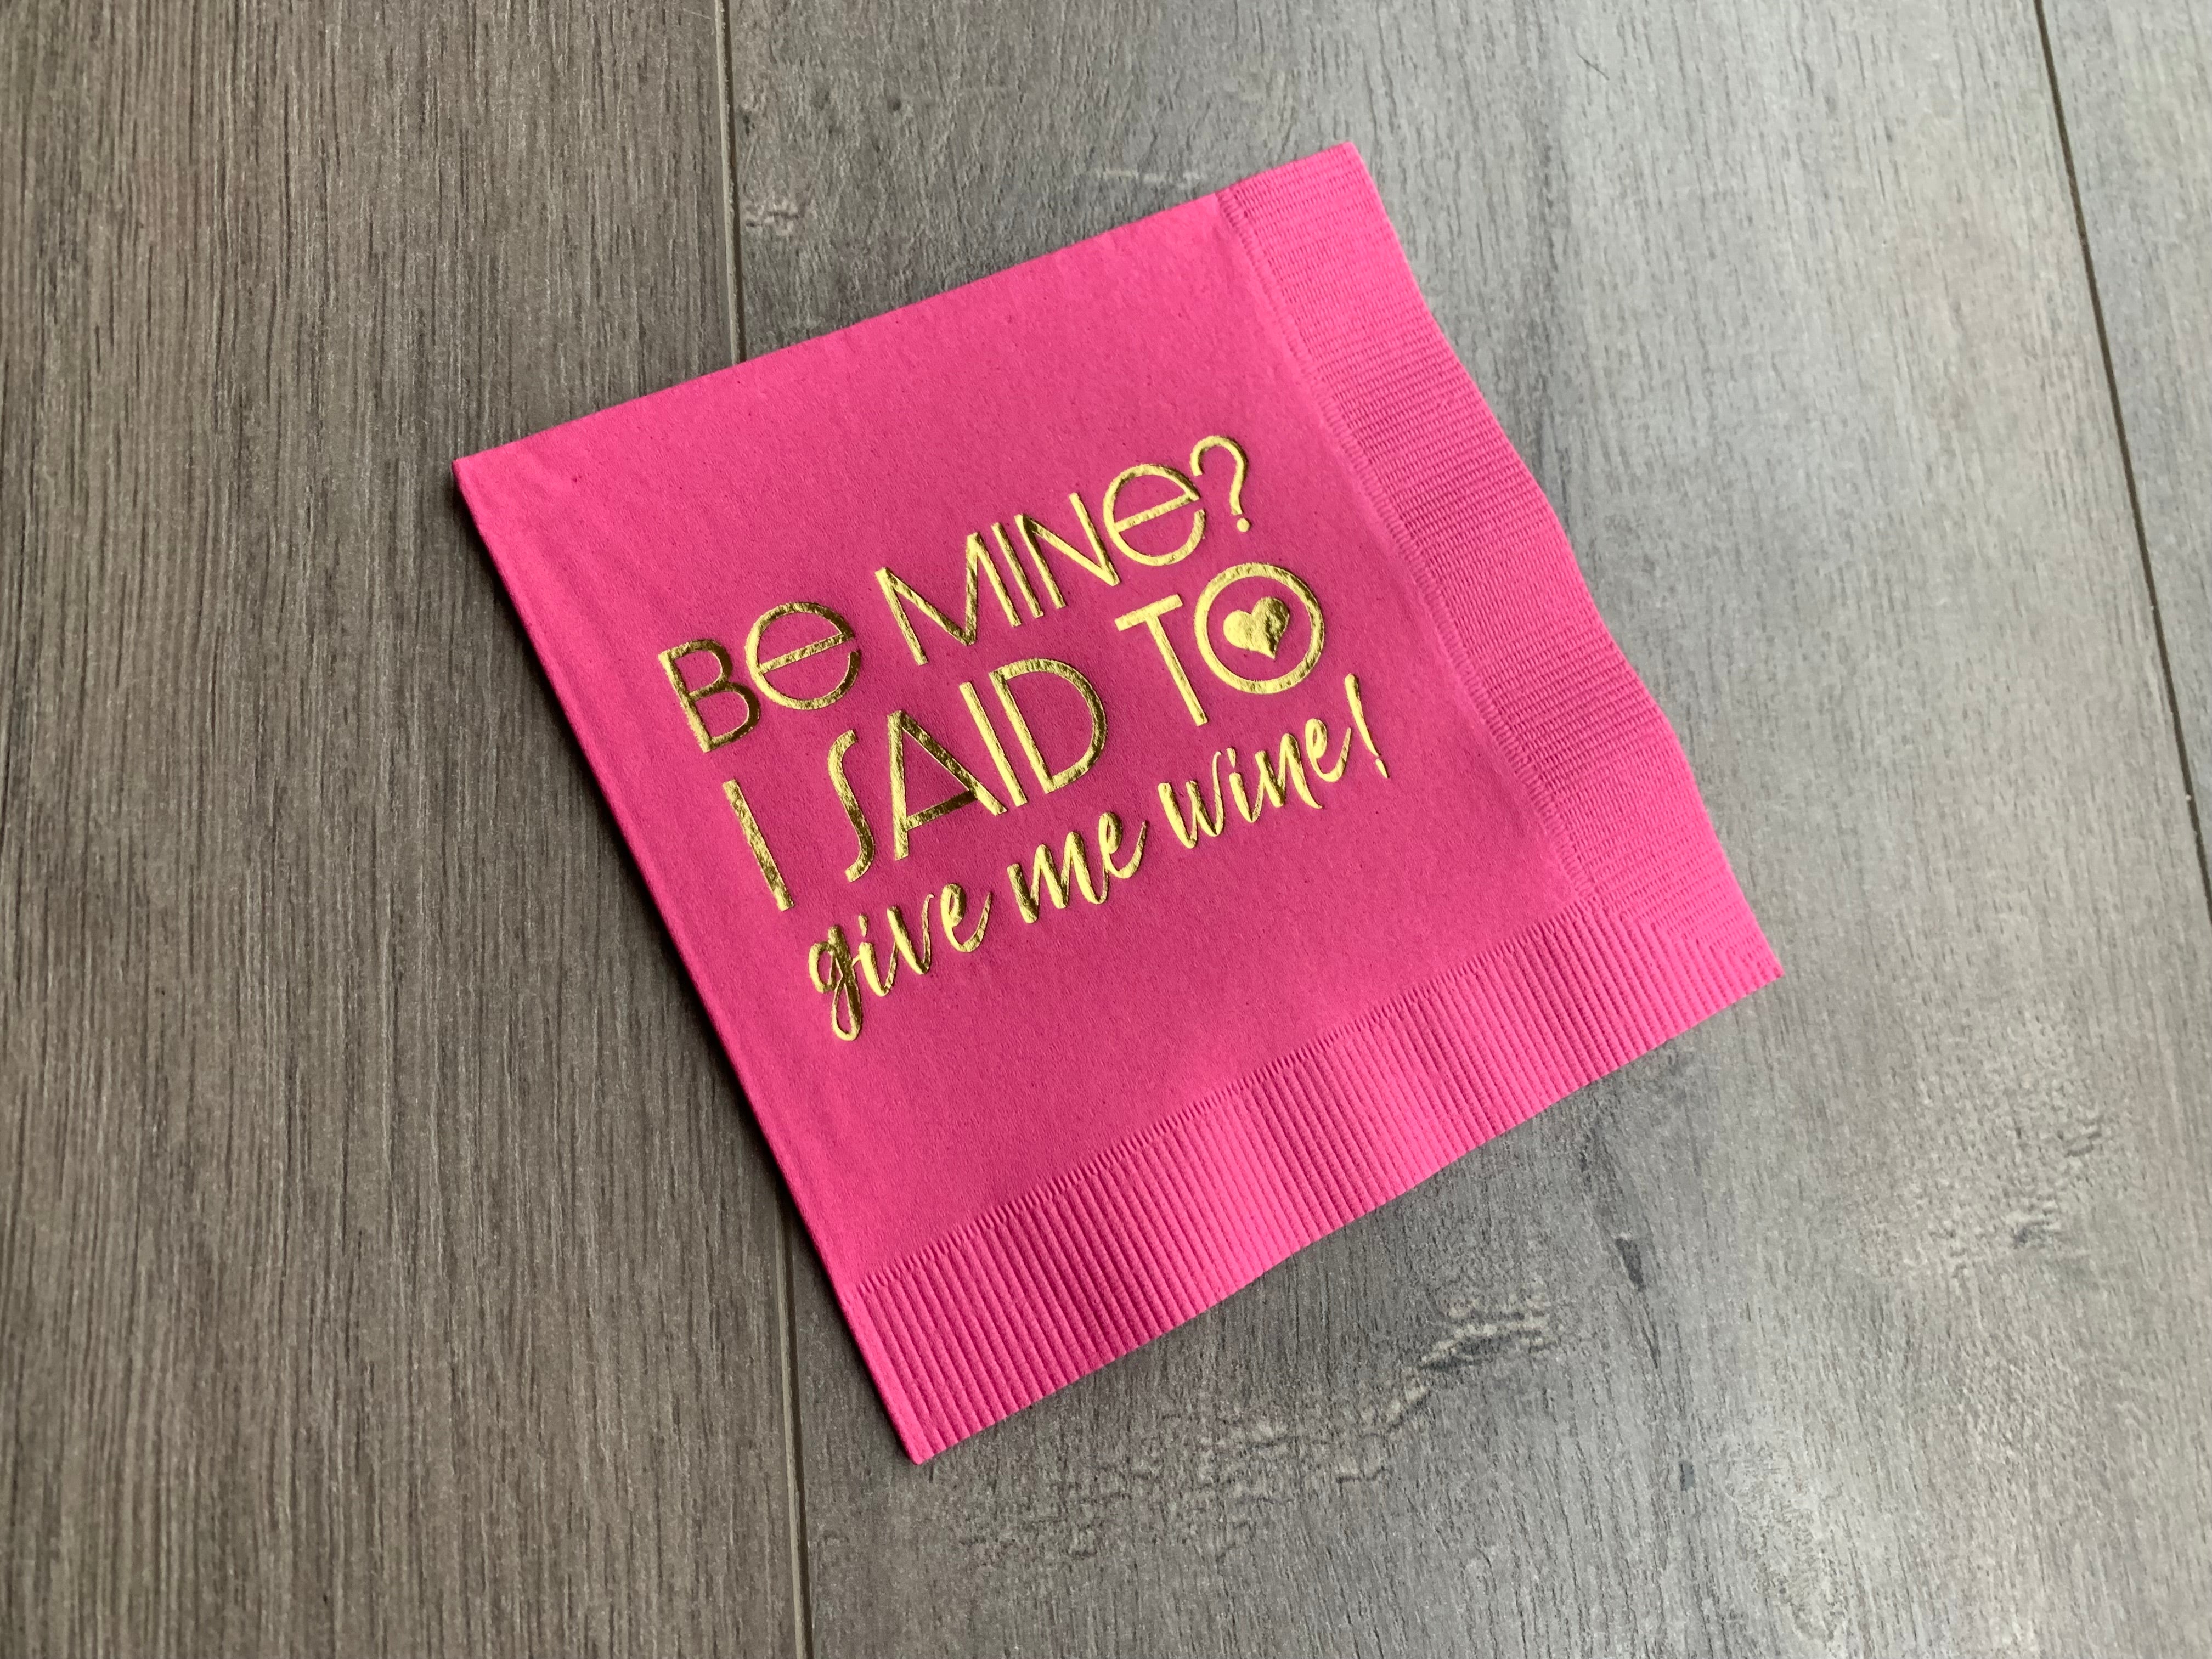 pink cocktail napkin on a wooden background. Metallic gold foil printing that reads Be Mine? I said to give me wine! Valentines's Day napkin by Stationare for girls night party, galentines, or a valentine party